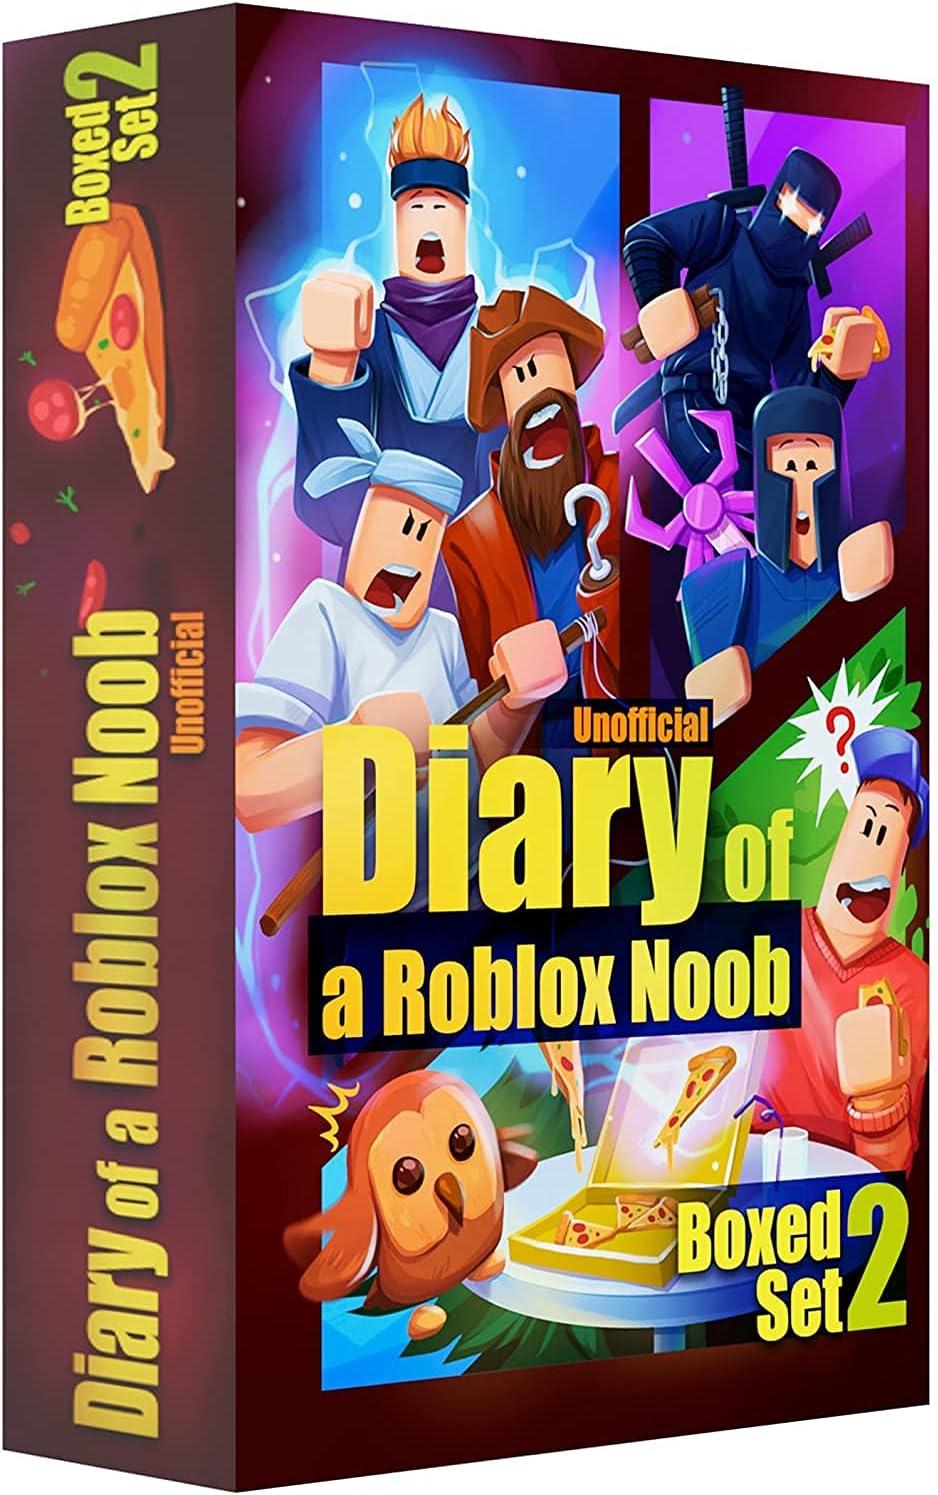  Robloxia Kid Diary of a Roblox Noob (Part 1): 5 Books Set Video  Game Adventure Stories - Independent & Unofficial Roblox Book Series for  Boys & Girls : Toys & Games